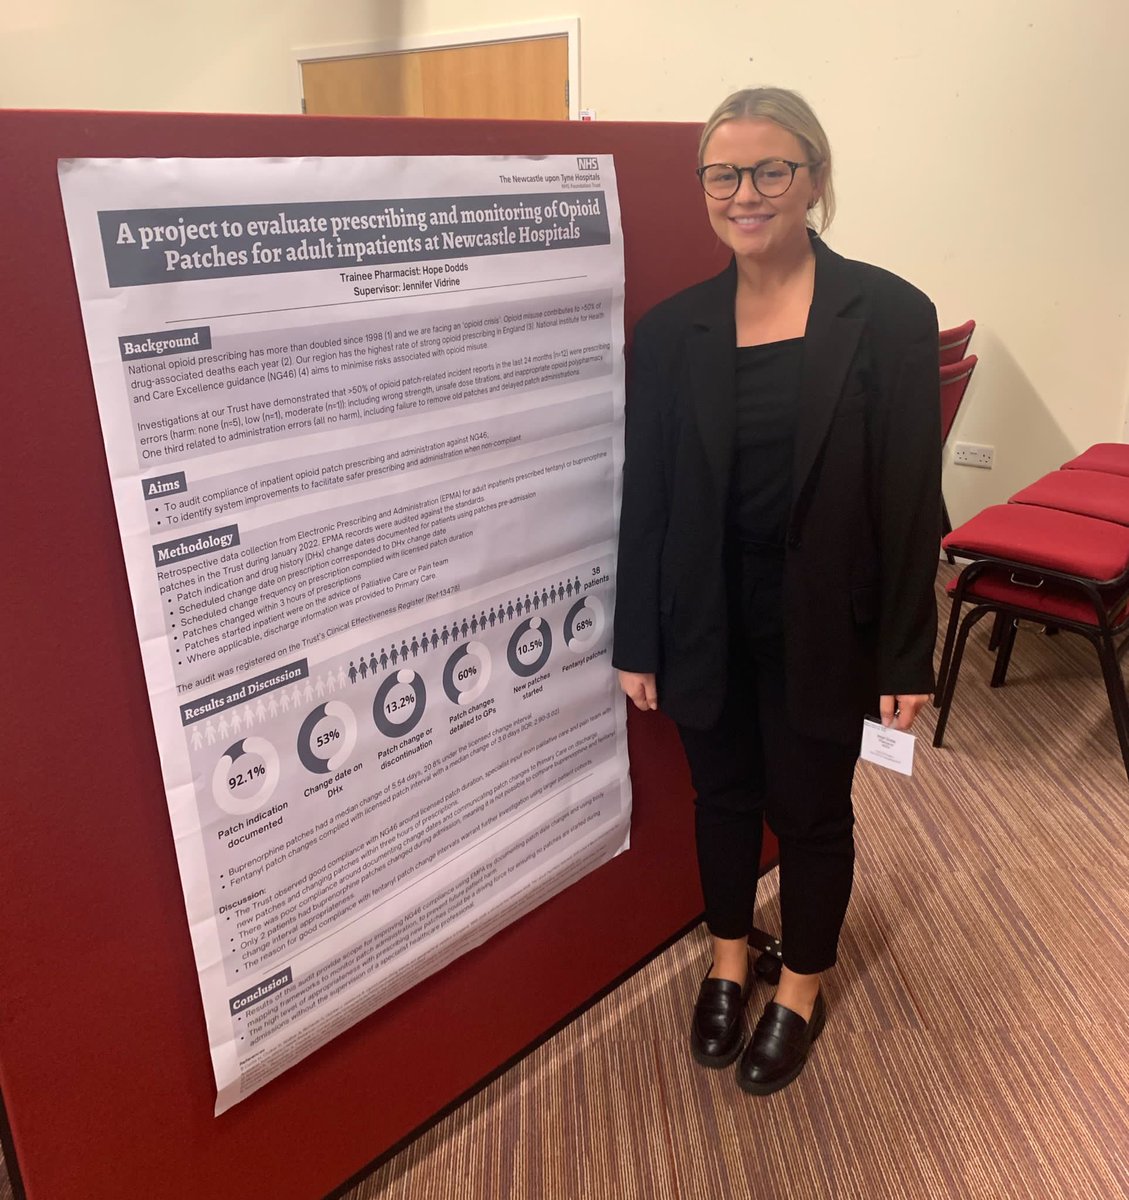 One of our foundation pharmacists, Hope Dodds, presenting her project on the safe use of Opioid Patches today at the #FeelingThePain conference in Durham today. Great work Hope 👏